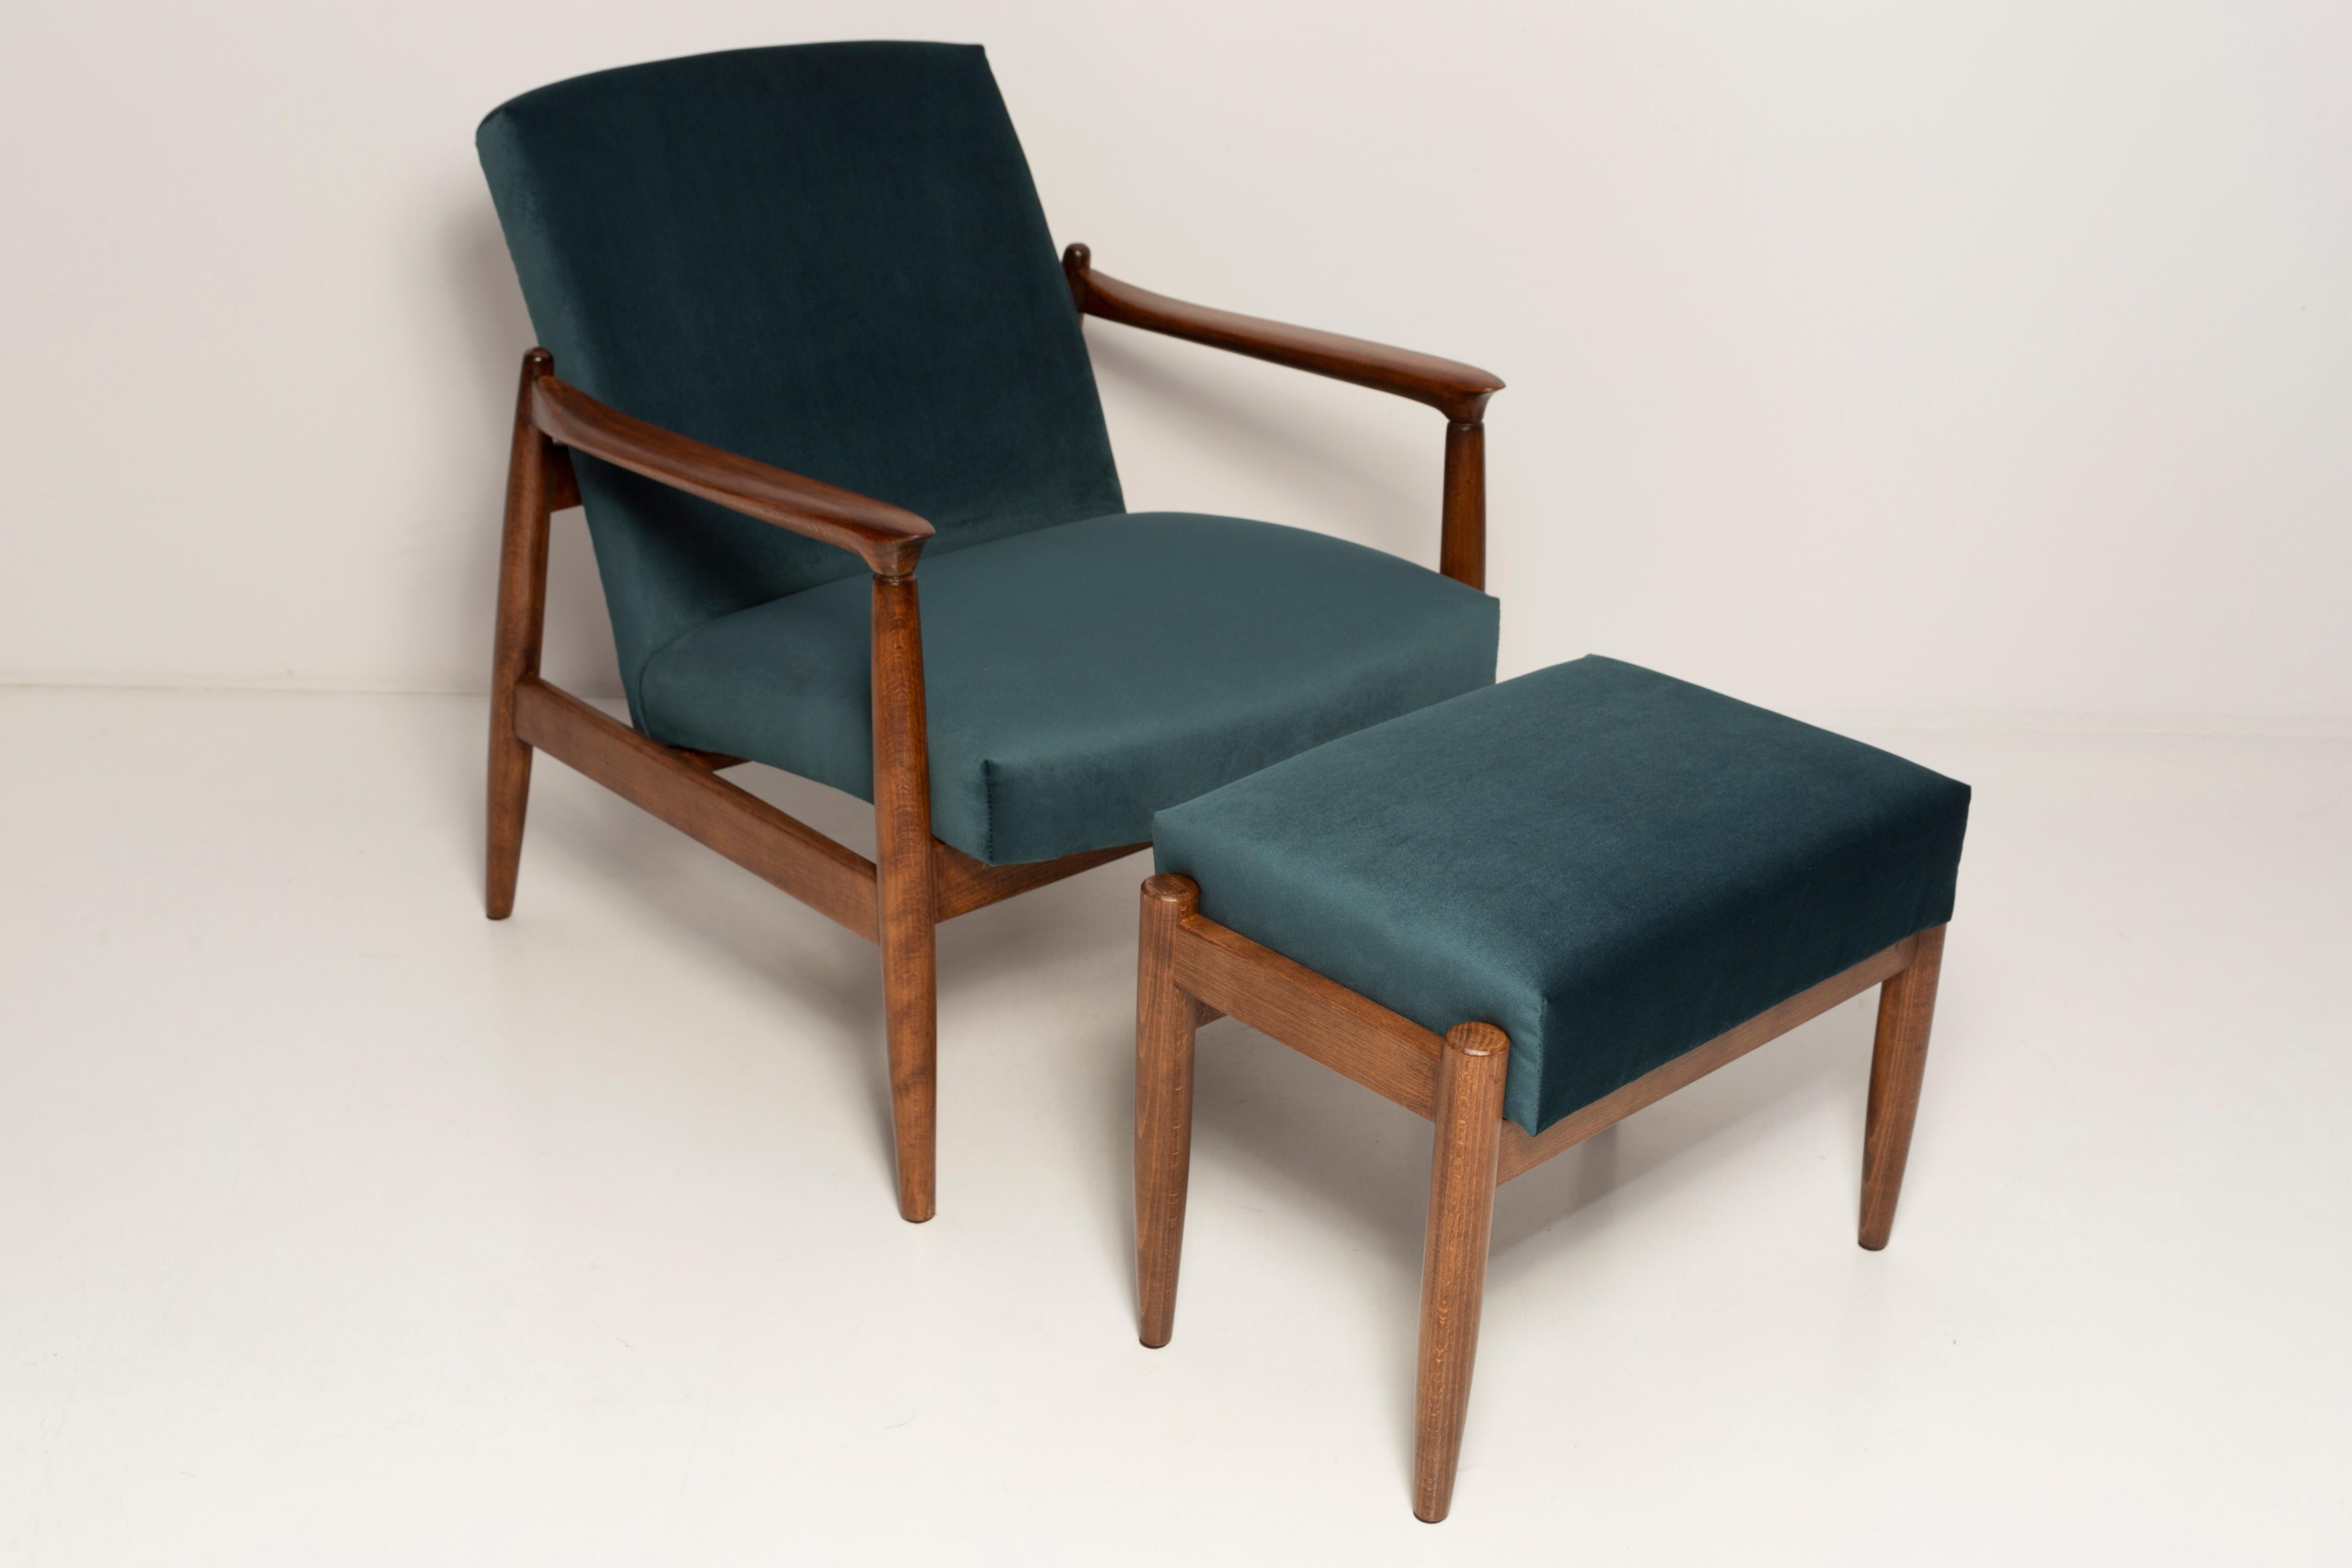 Hand-Crafted Set of Petrol Blue Vintage Armchair and Stool, Edmund Homa, 1960s For Sale